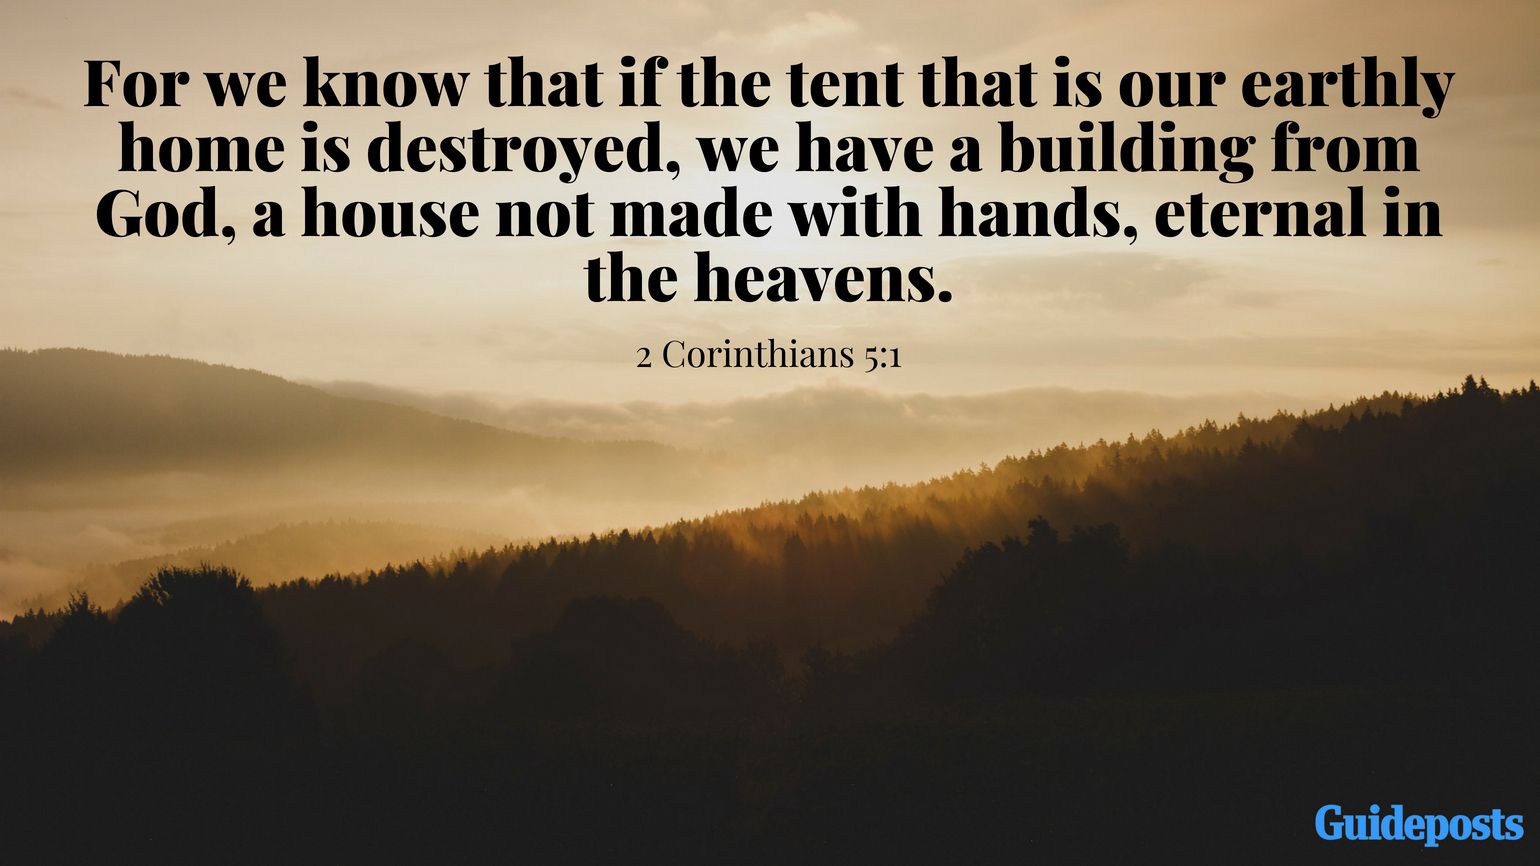 For we know that if the tent that is our earthly home is destroyed, we have a building from God, a house not made with hands, eternal in the heavens. 2 Corinthians 5:1